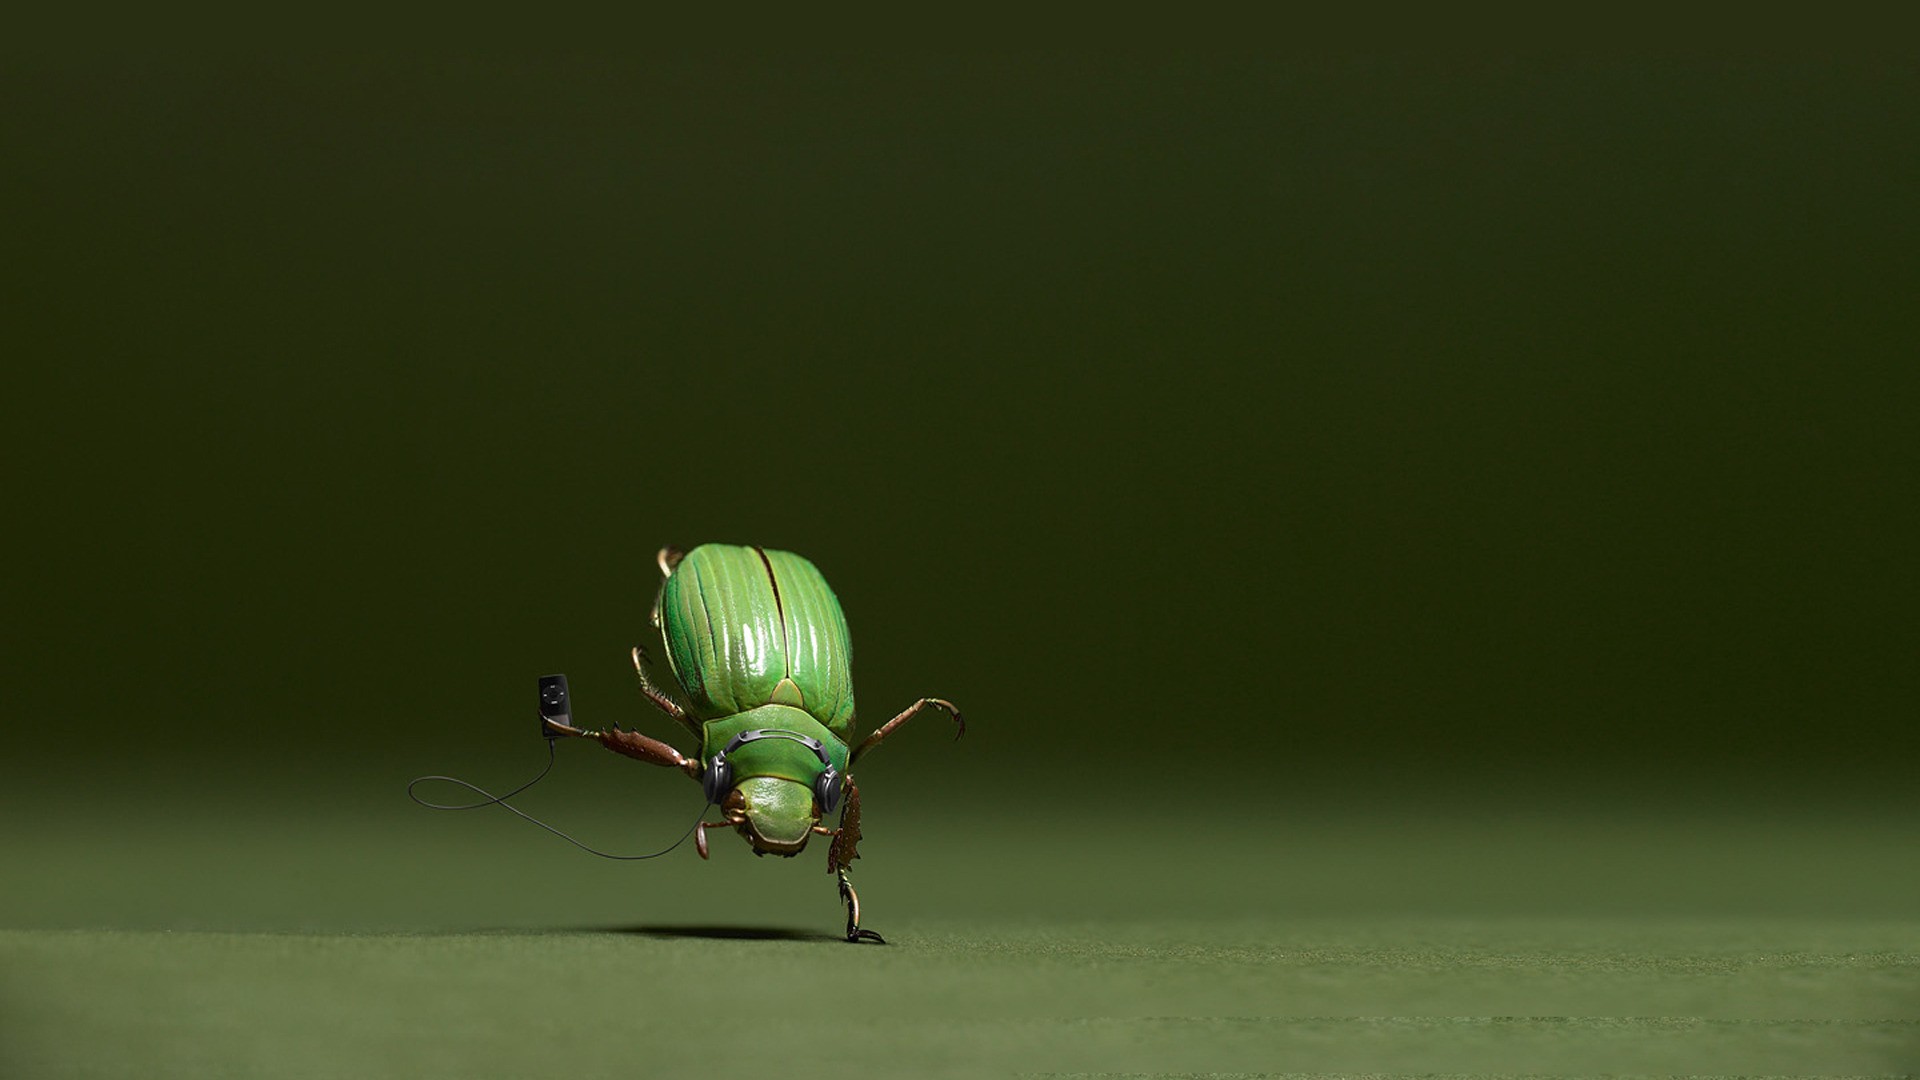  Bug Mobile Wallpaper Download HQ Backgrounds HD wallpapers Gallery